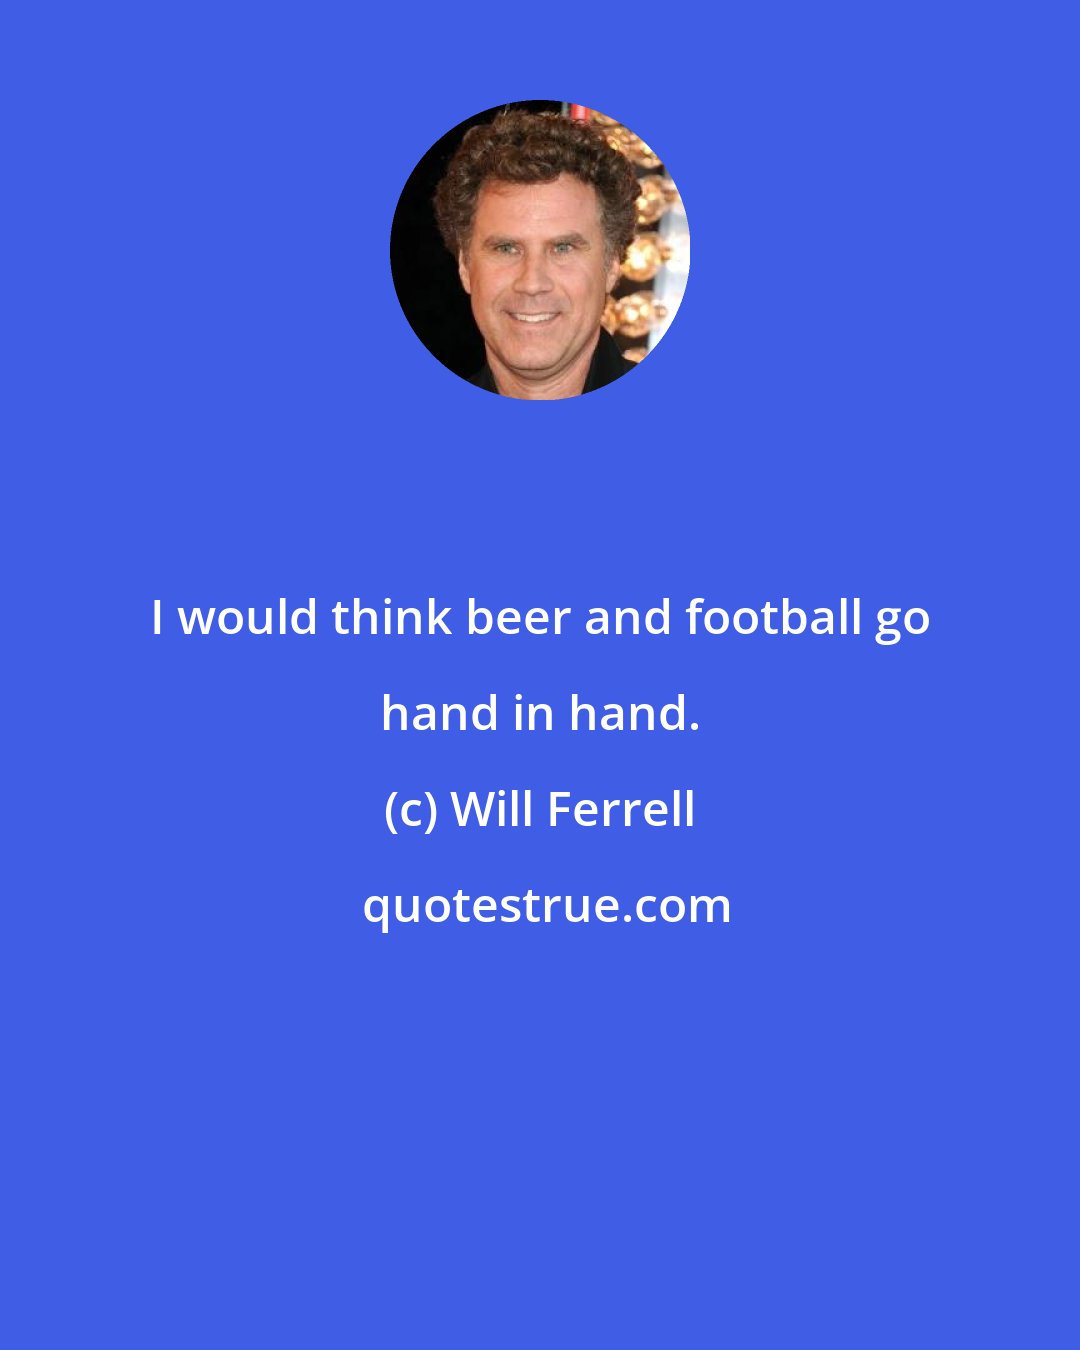 Will Ferrell: I would think beer and football go hand in hand.